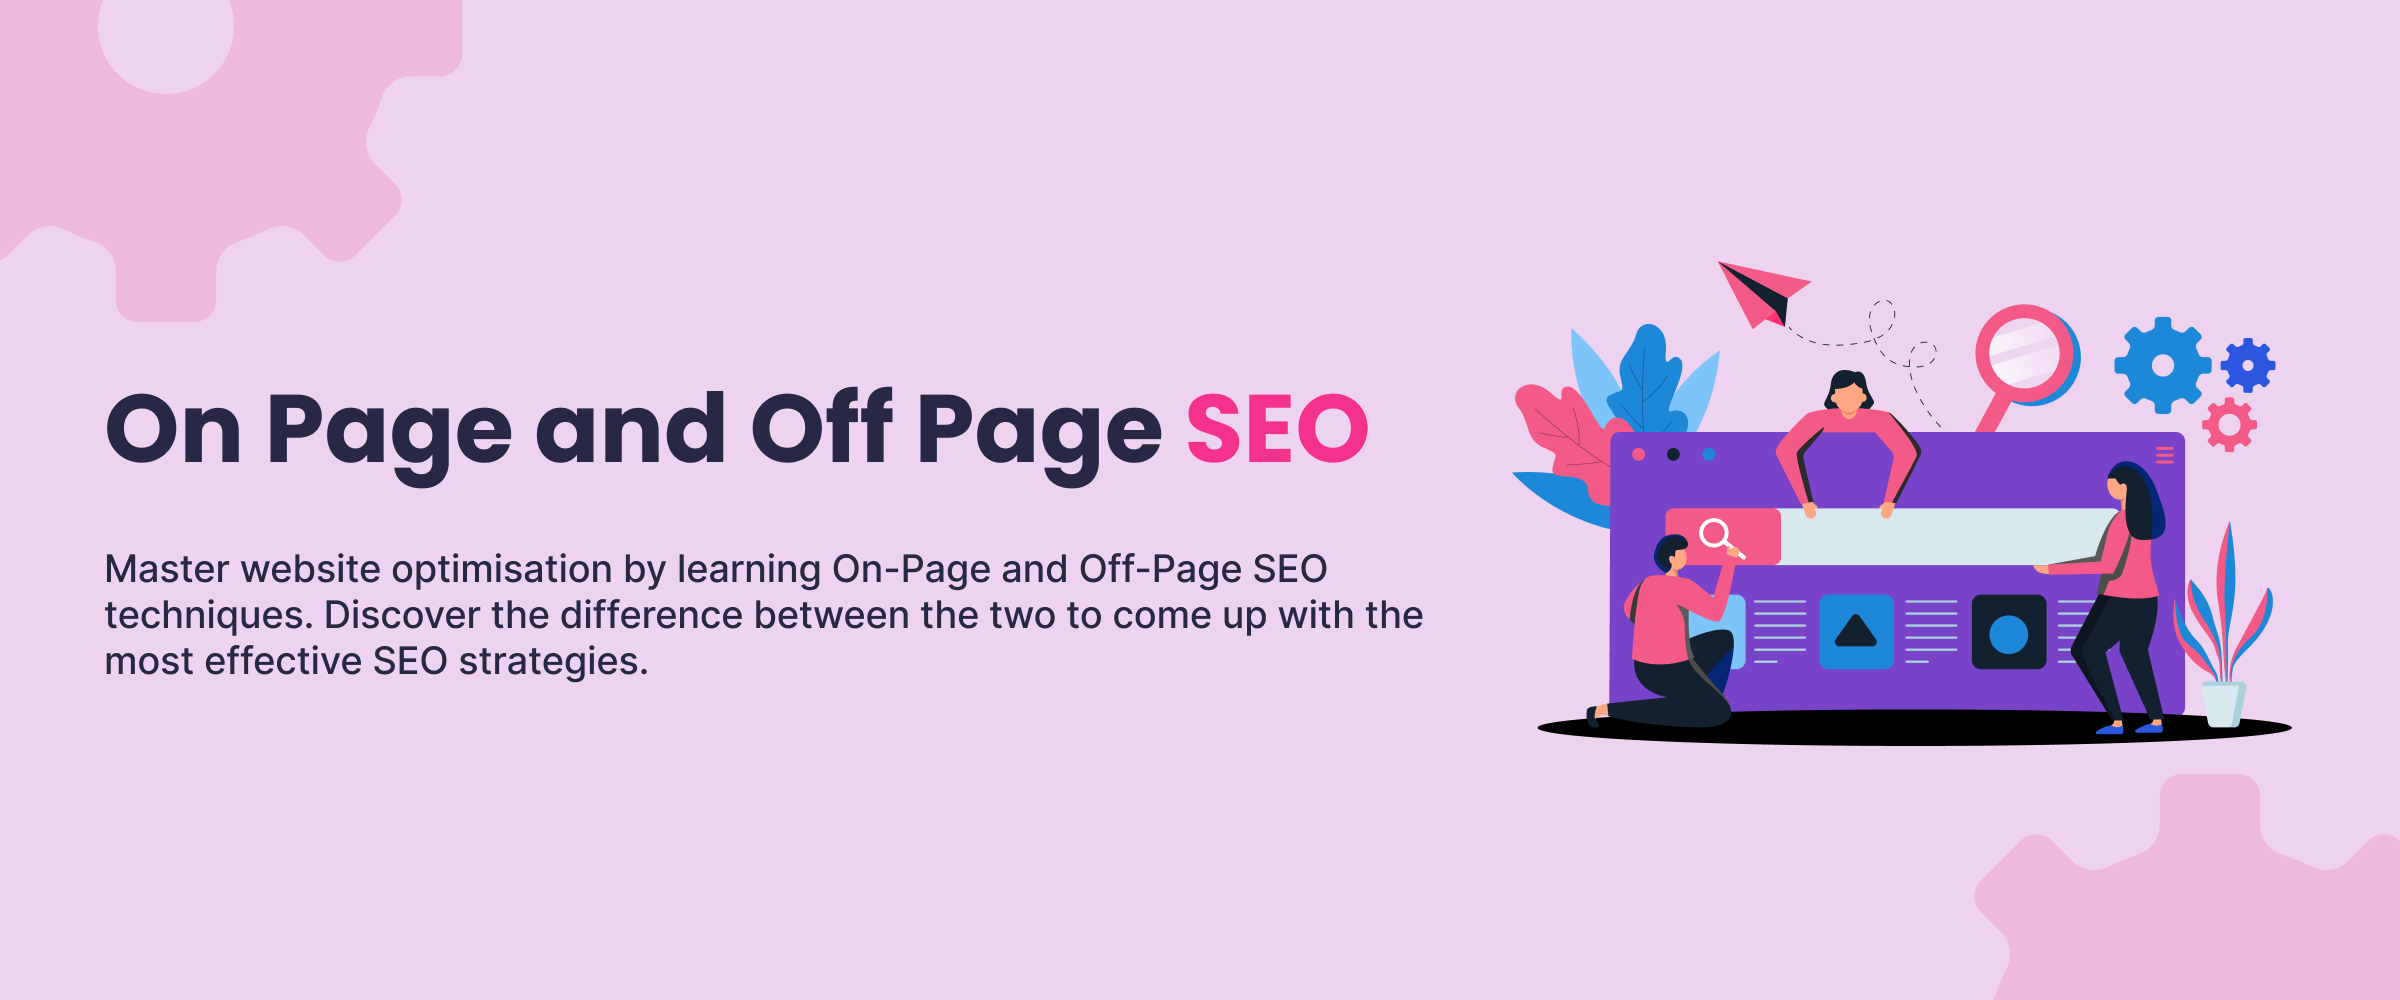 On page and off page SEO